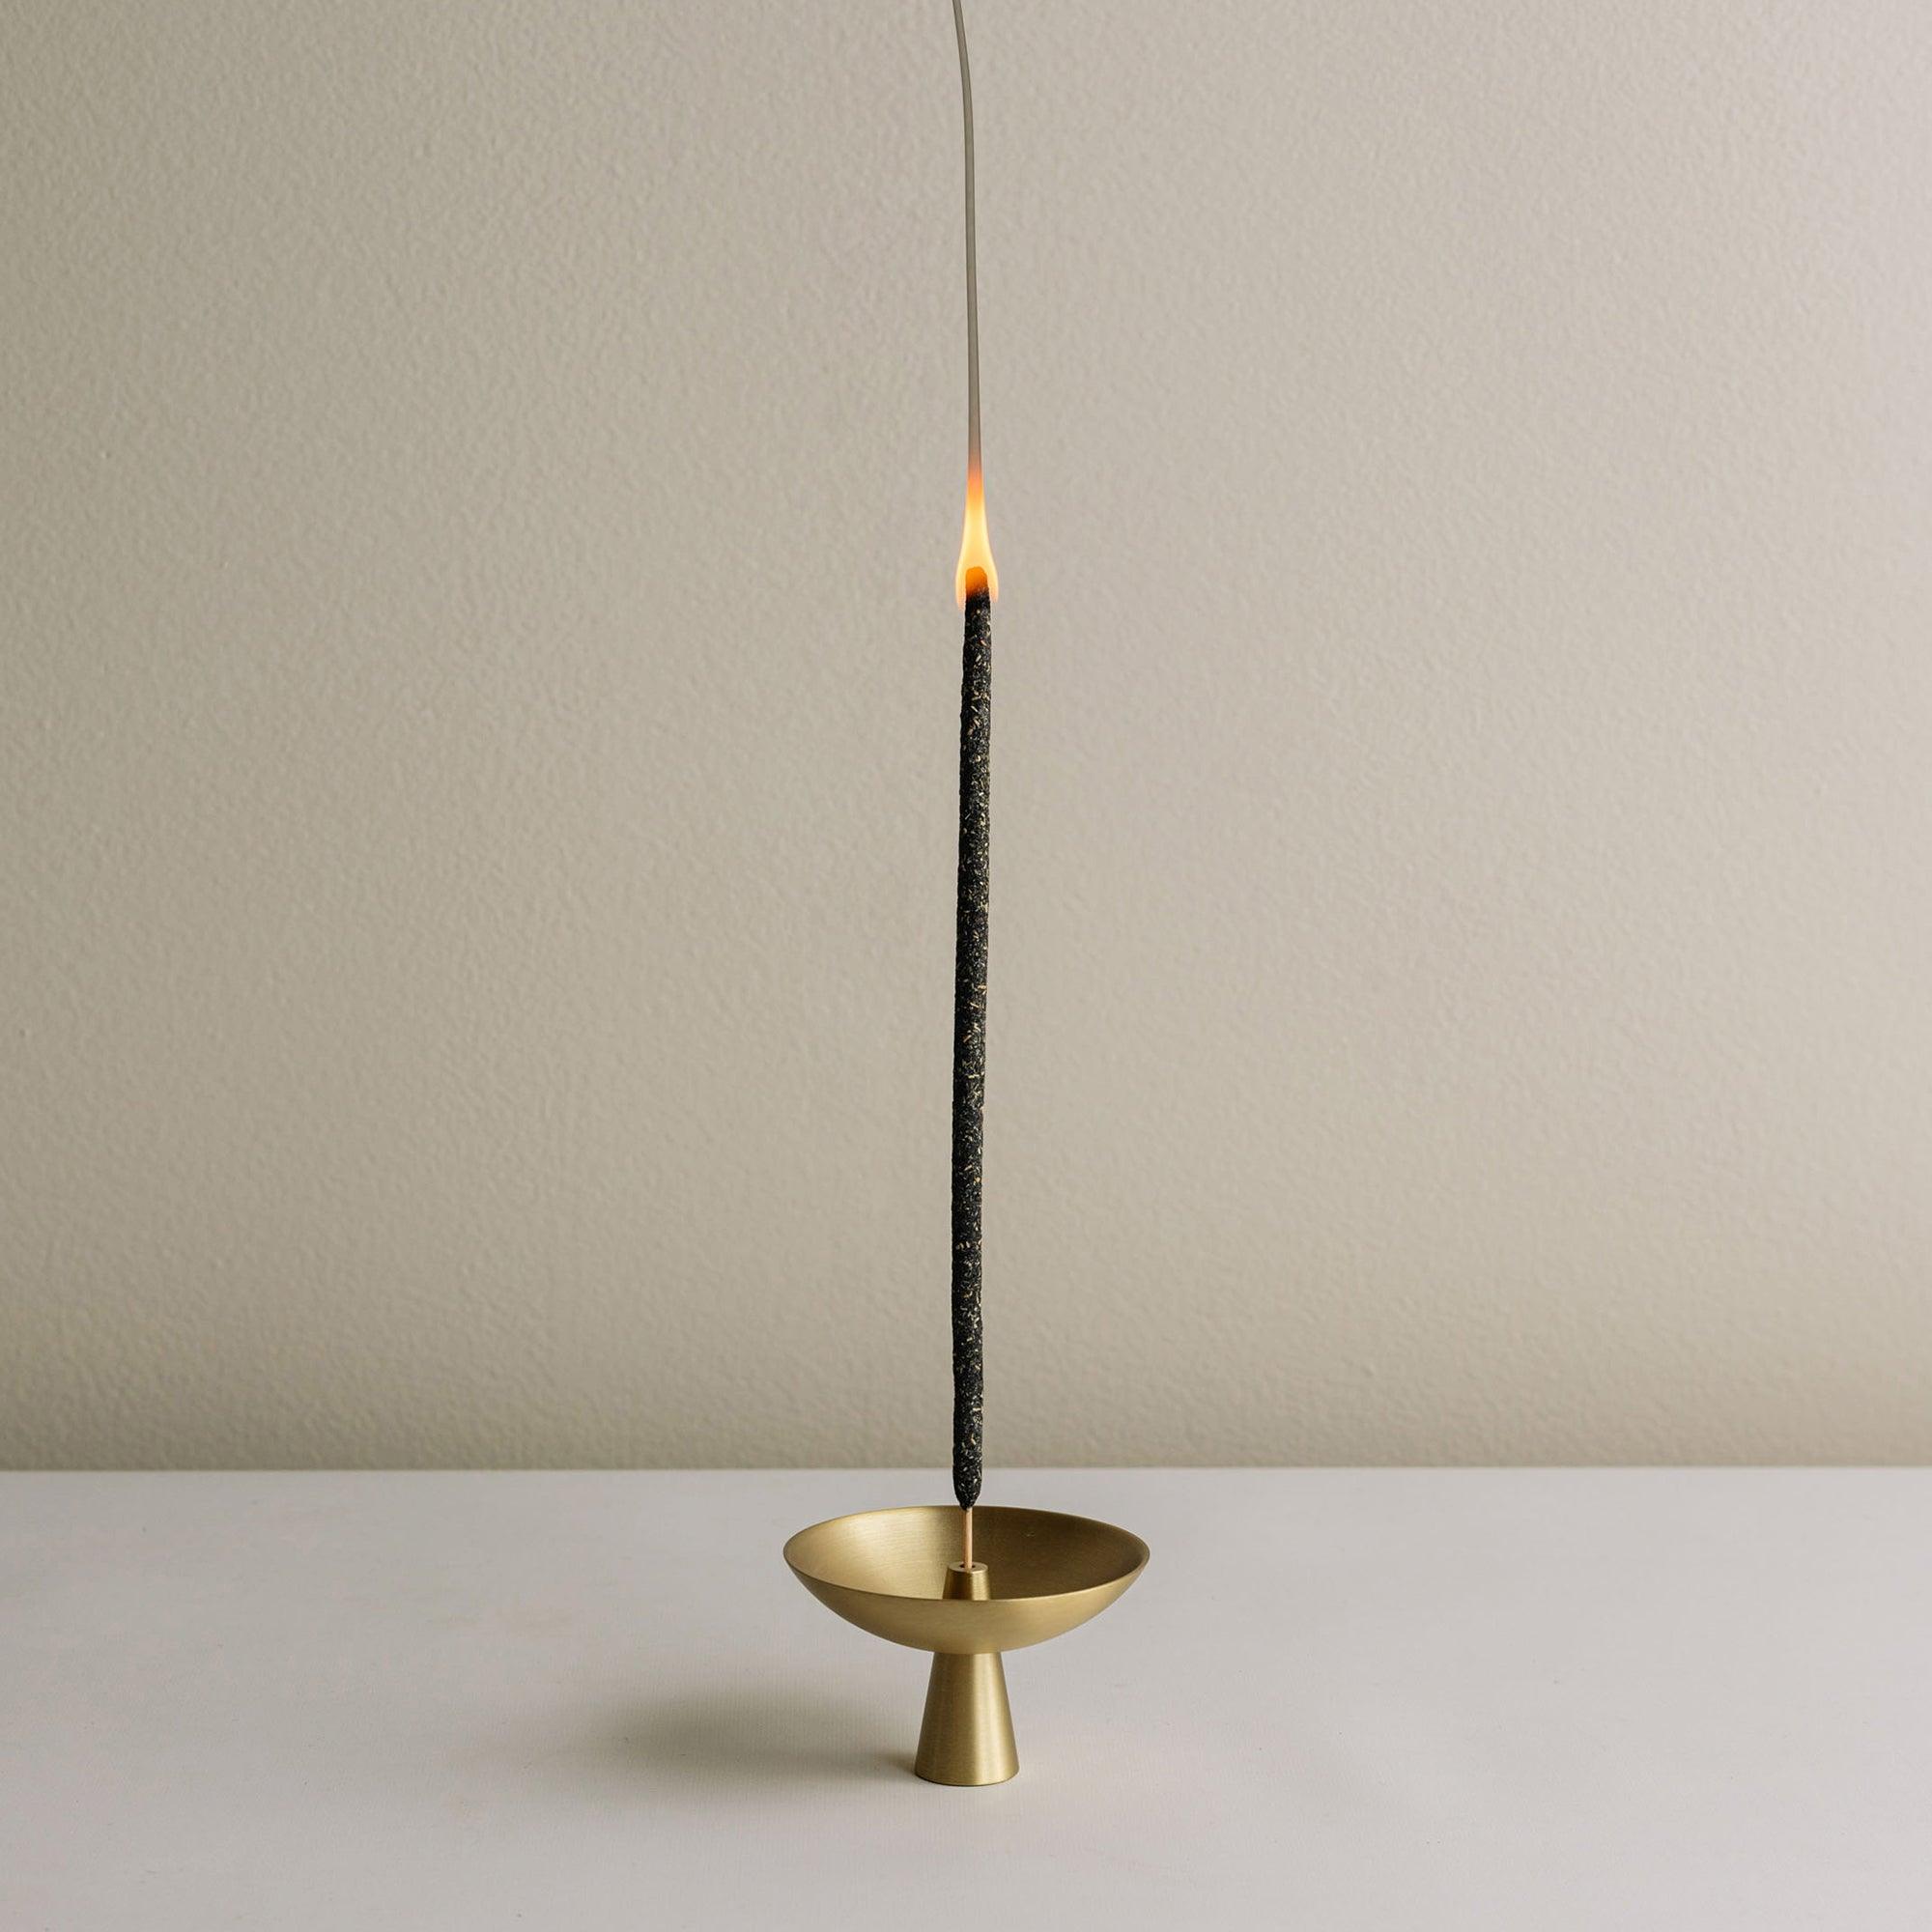 copal incense and incense holder with ash catcher made of brass